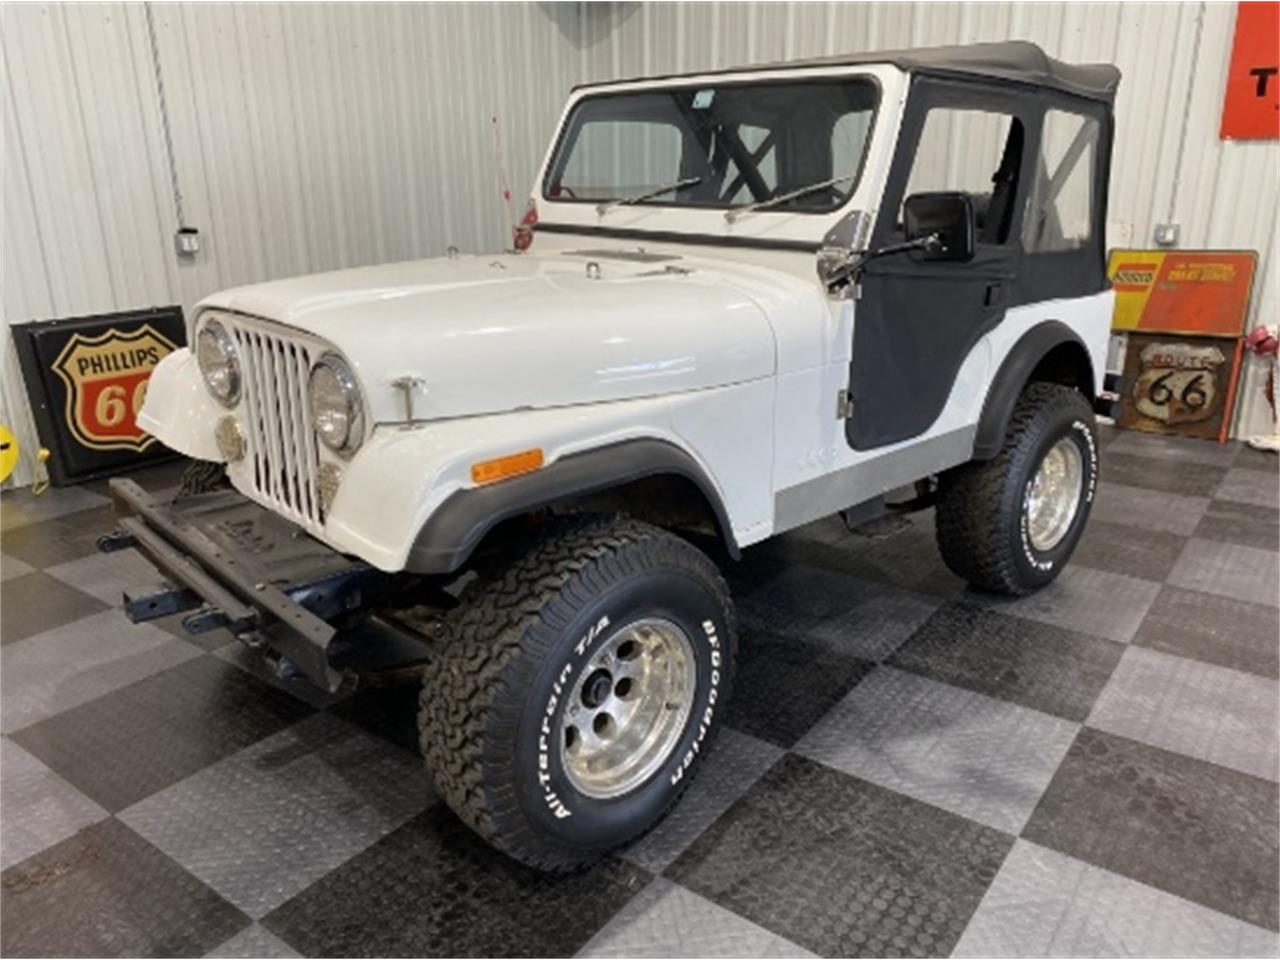 For Sale at Auction: 1981 Jeep CJ5 in Shawnee, Oklahoma for sale in Shawnee, OK